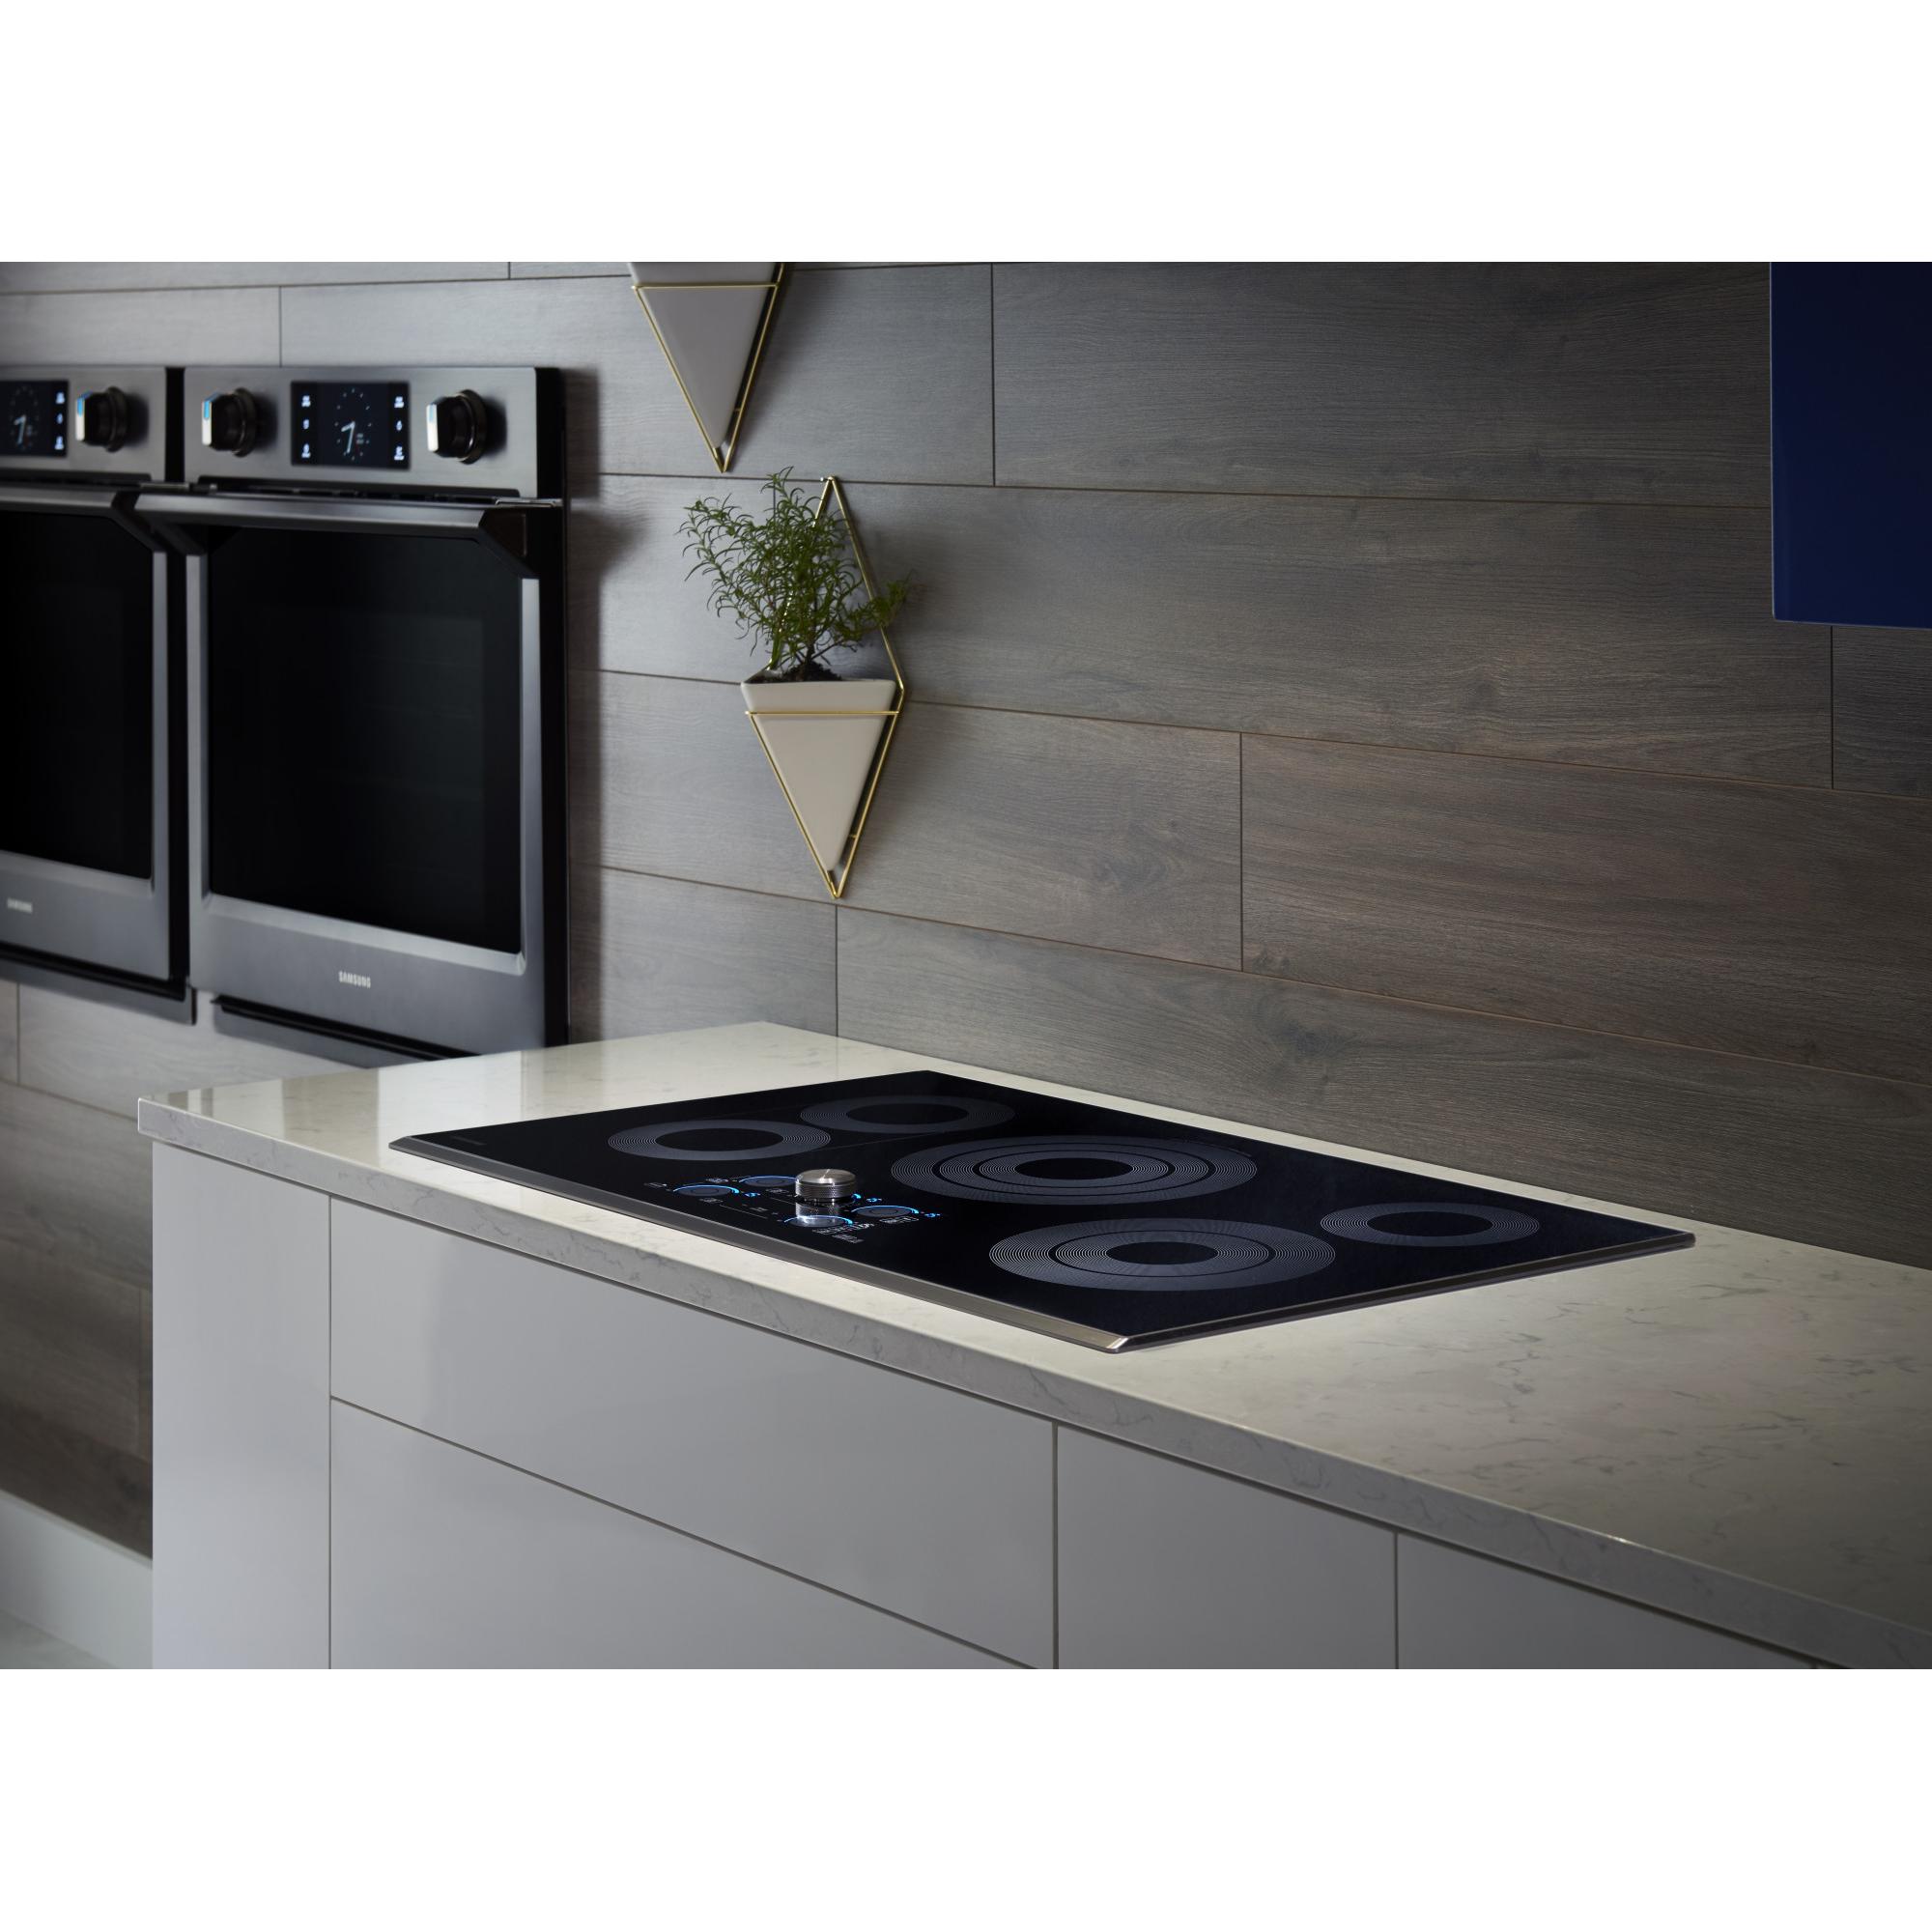 Samsung 30-inch Built-In Electric Cooktop NZ30K7570RG/AA